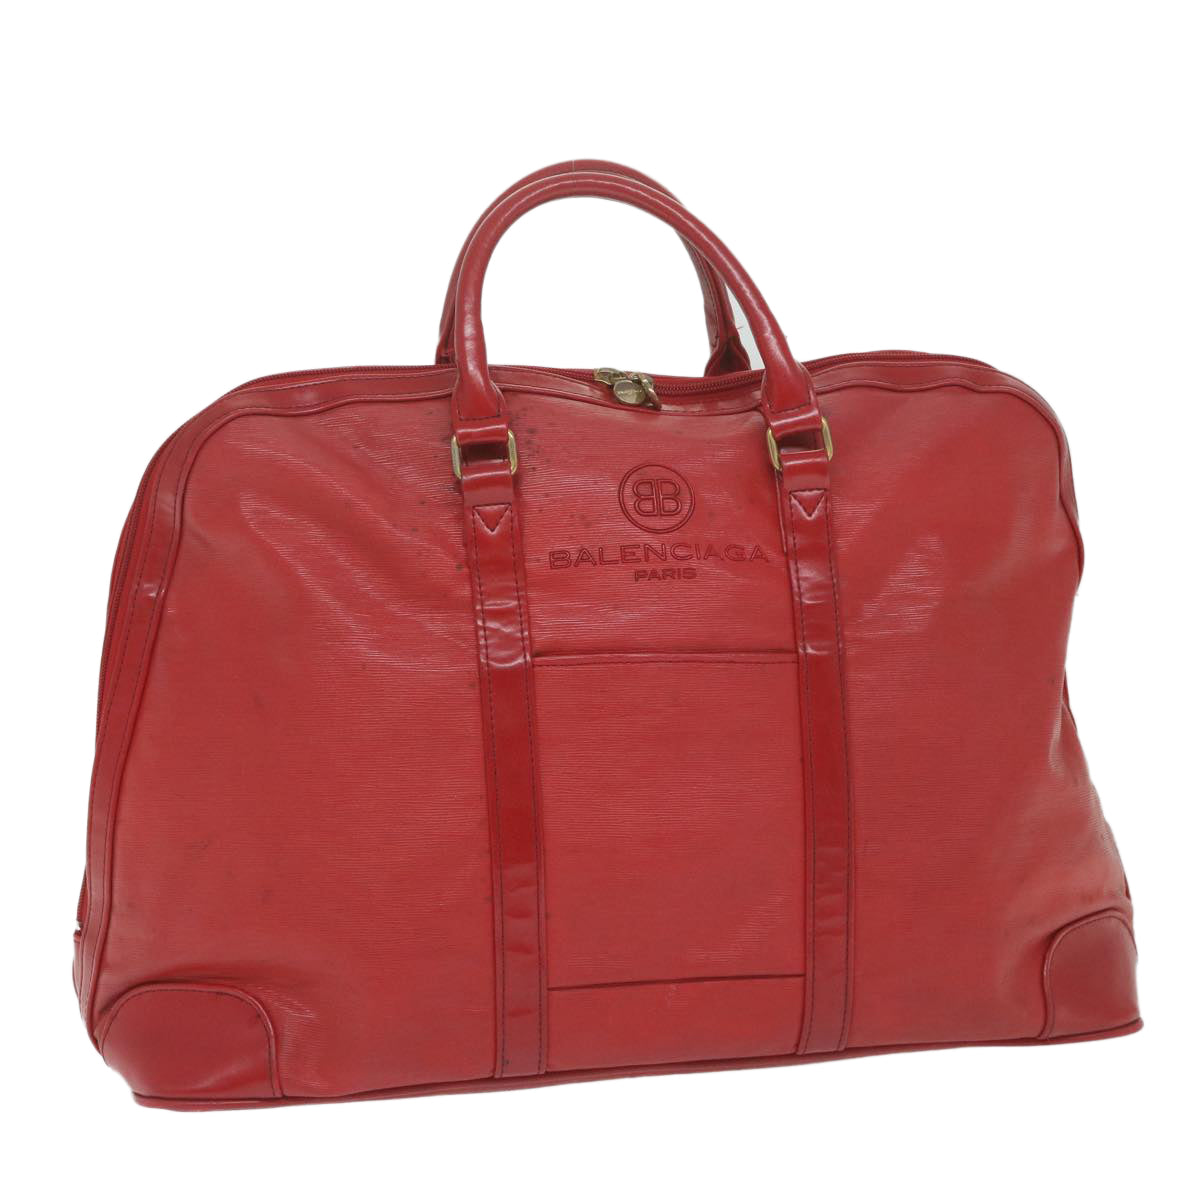 BALENCIAGA Boston Bag Patent leather Red Auth bs11406